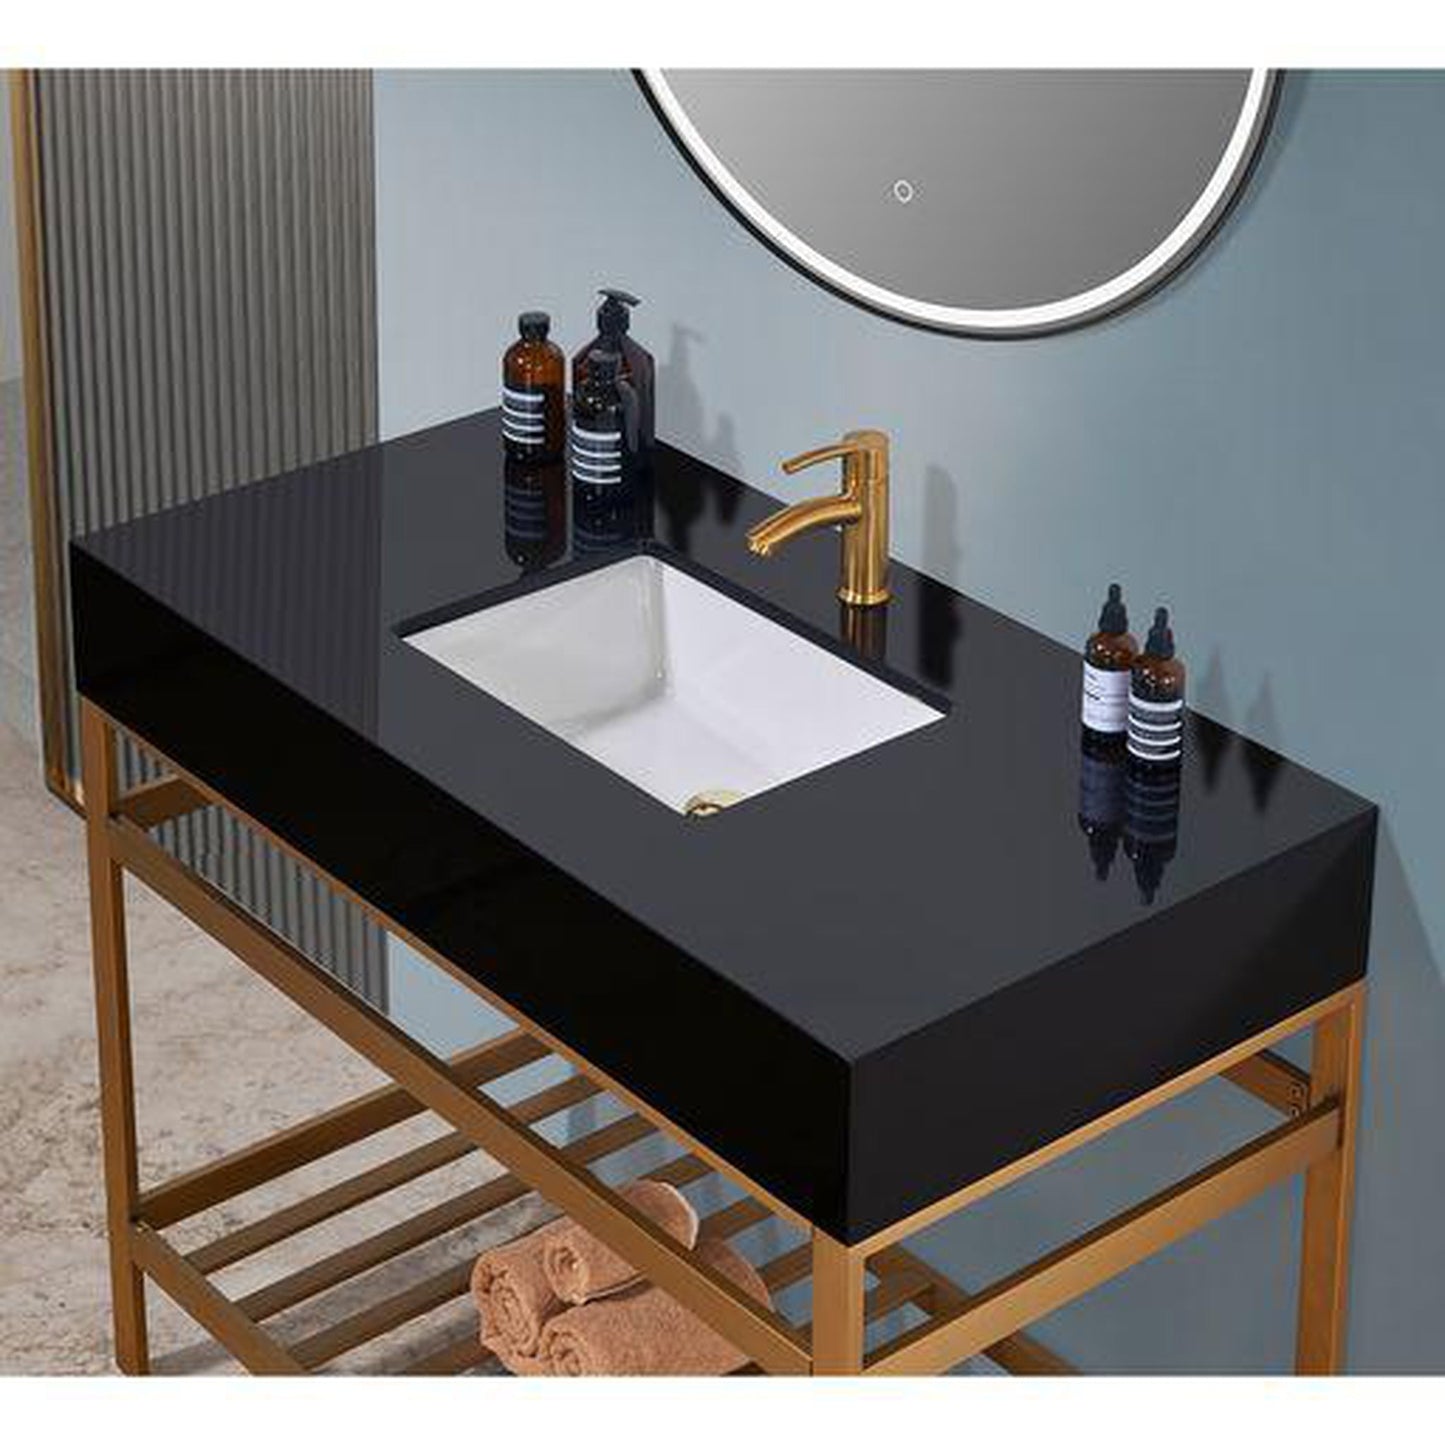 Altair Nauders 42" Brushed Gold Single Stainless Steel Bathroom Vanity Set Console With Mirror, Imperial Black Stone Top, Single Rectangular Undermount Ceramic Sink, and Safety Overflow Hole